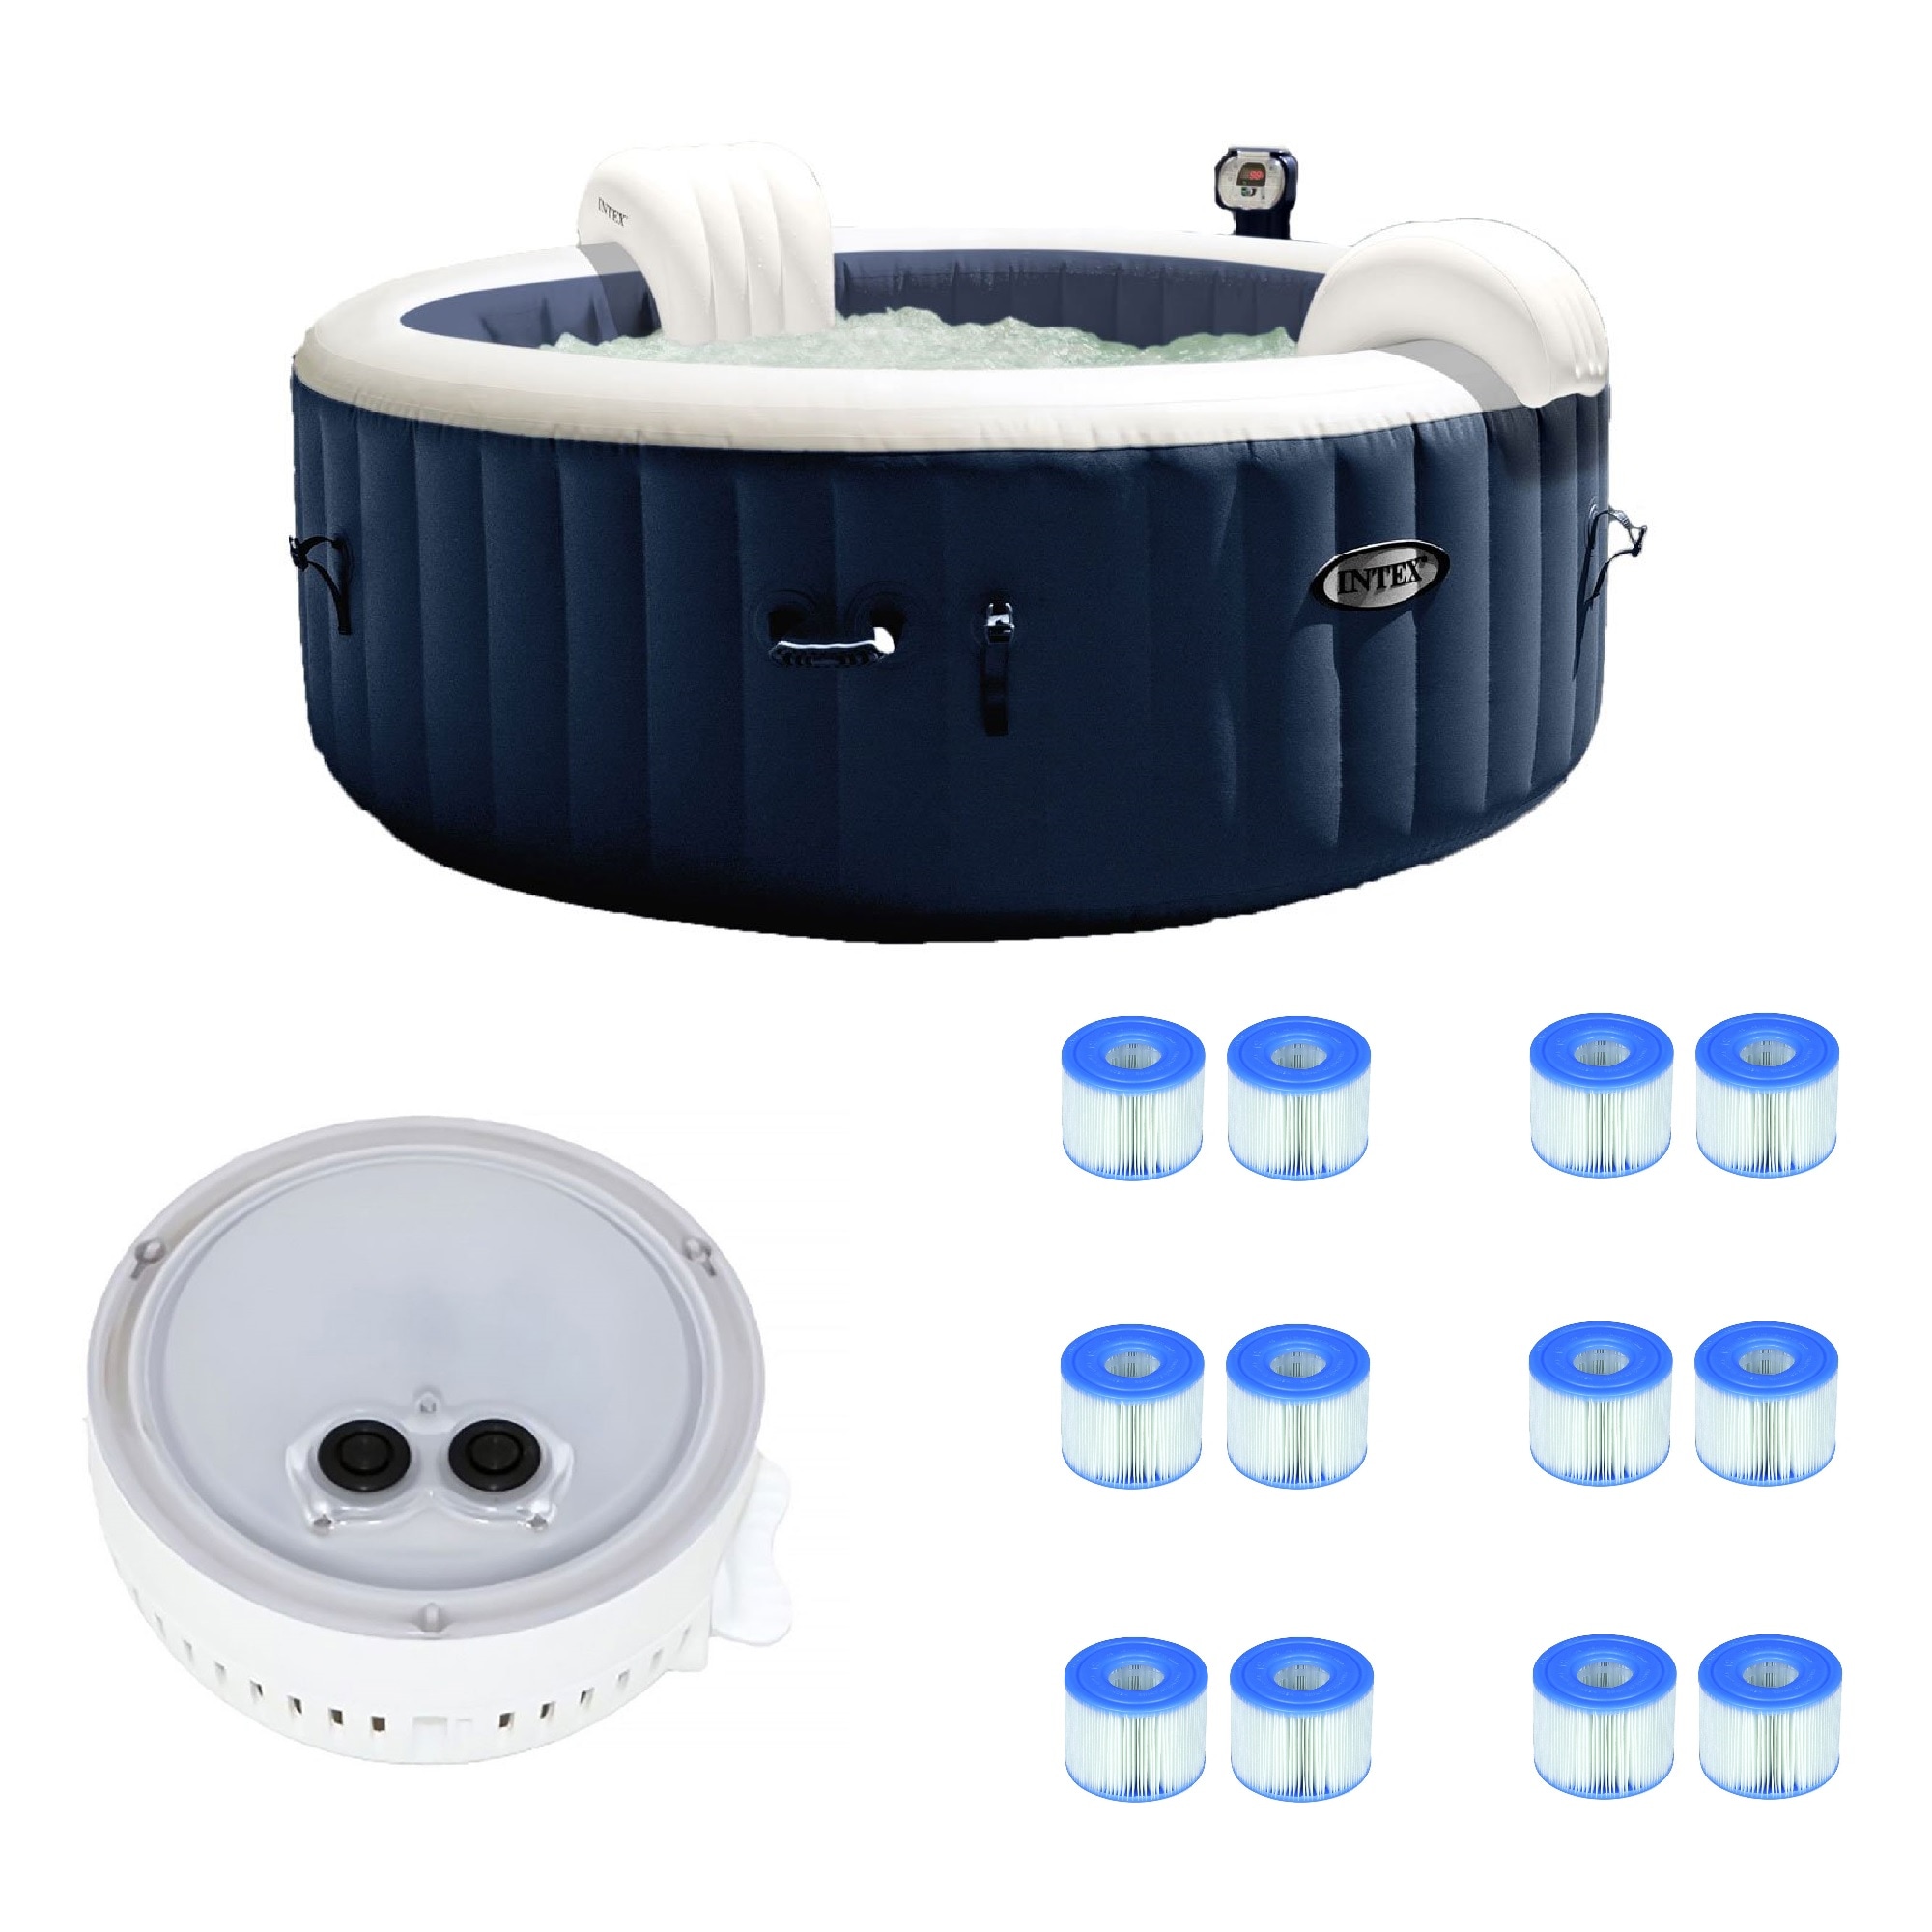 Intex 4 Person 140 Jet Round Inflatable Hot Tub At